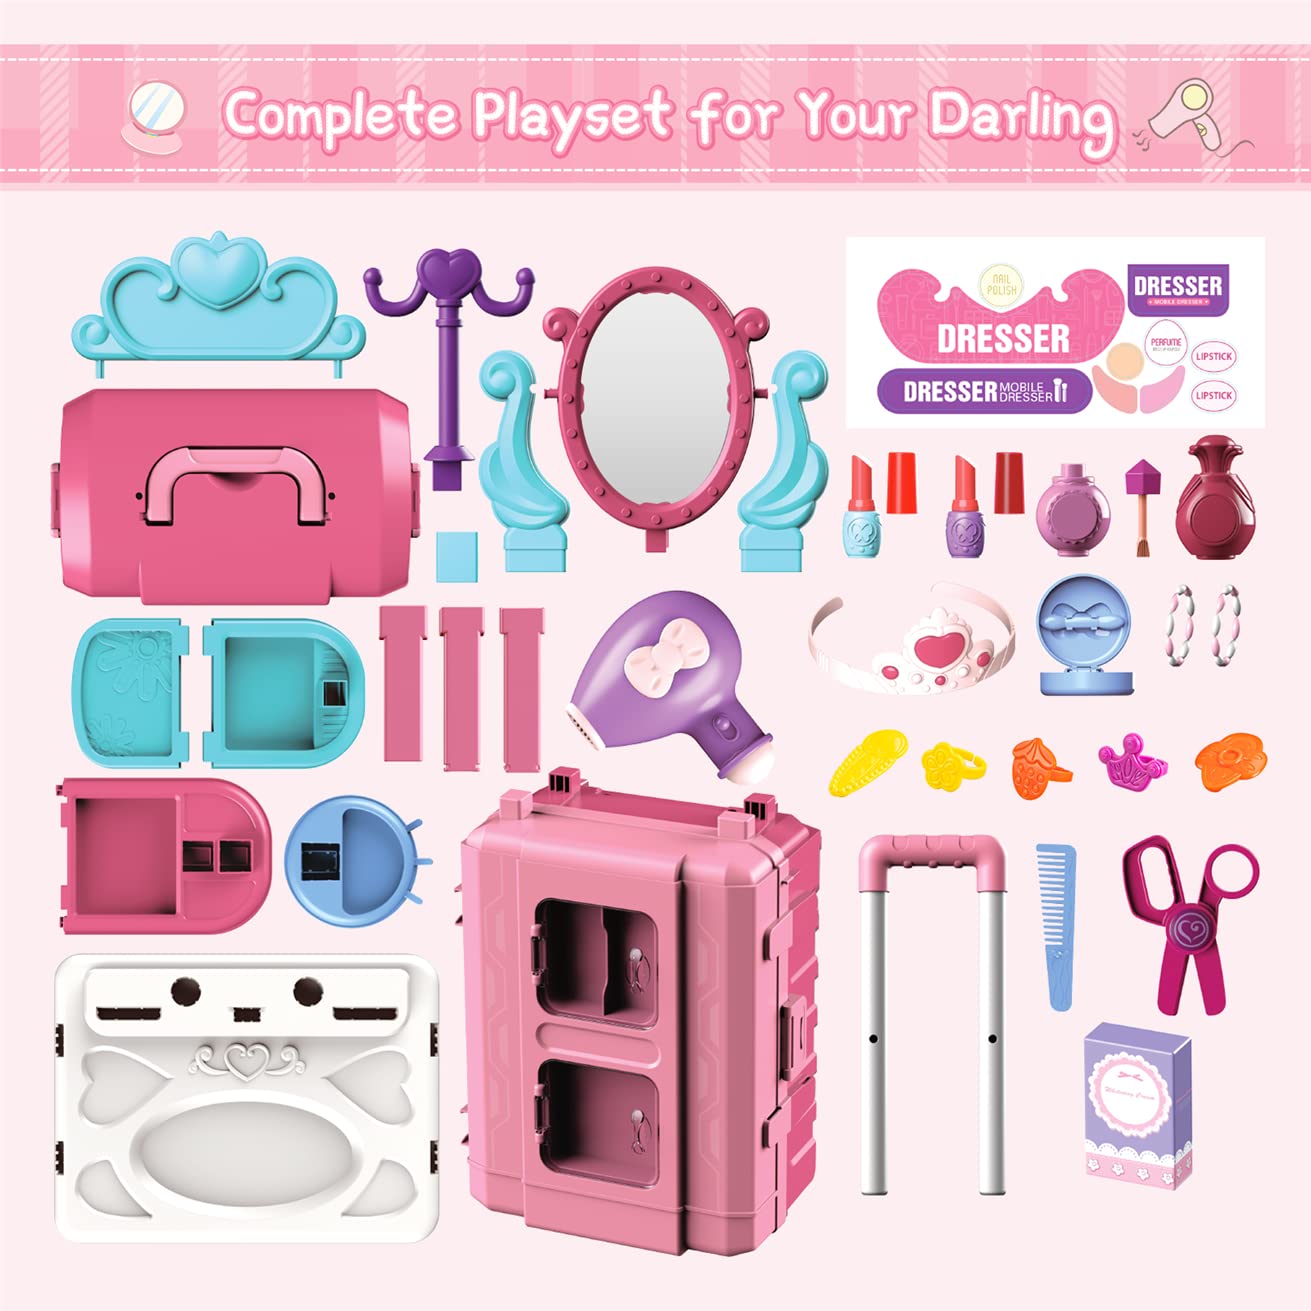 Dlordy Girls Toy Princess Makeup Vanity for Kids, Toddler Dress-up Table Toy for 3 4 5 6 Years Old Girls Boys Kids Role Play Beauty Salon Playset Gifts for Christmas Birthday Party New Year